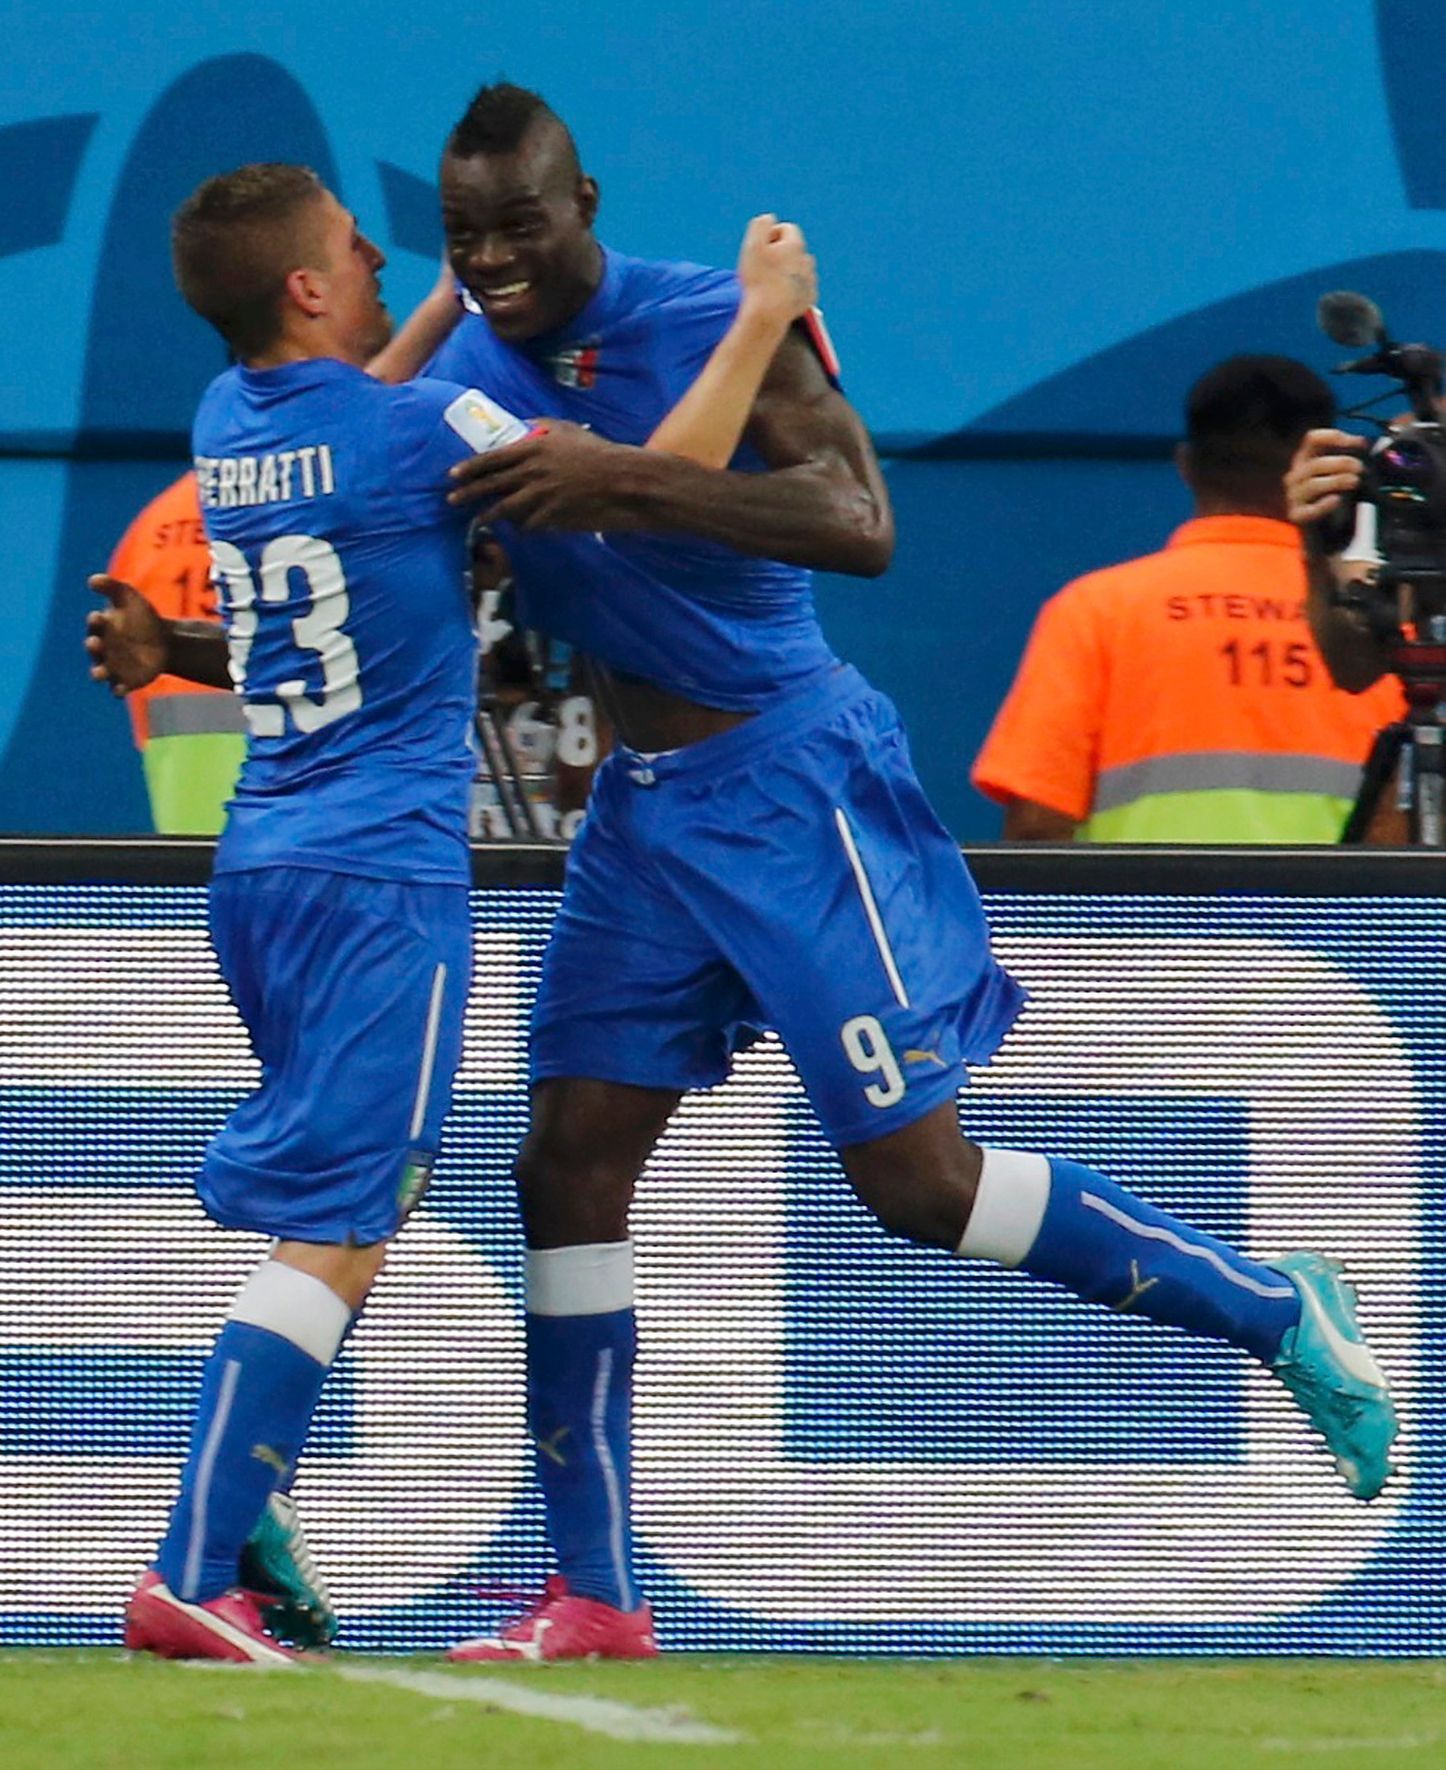 Italy's Balotelli and his Verratti celebrate after Balotelli scored a goal against England during their 2014 World Cup Group D soccer match at the Amazonia arena in Manaus